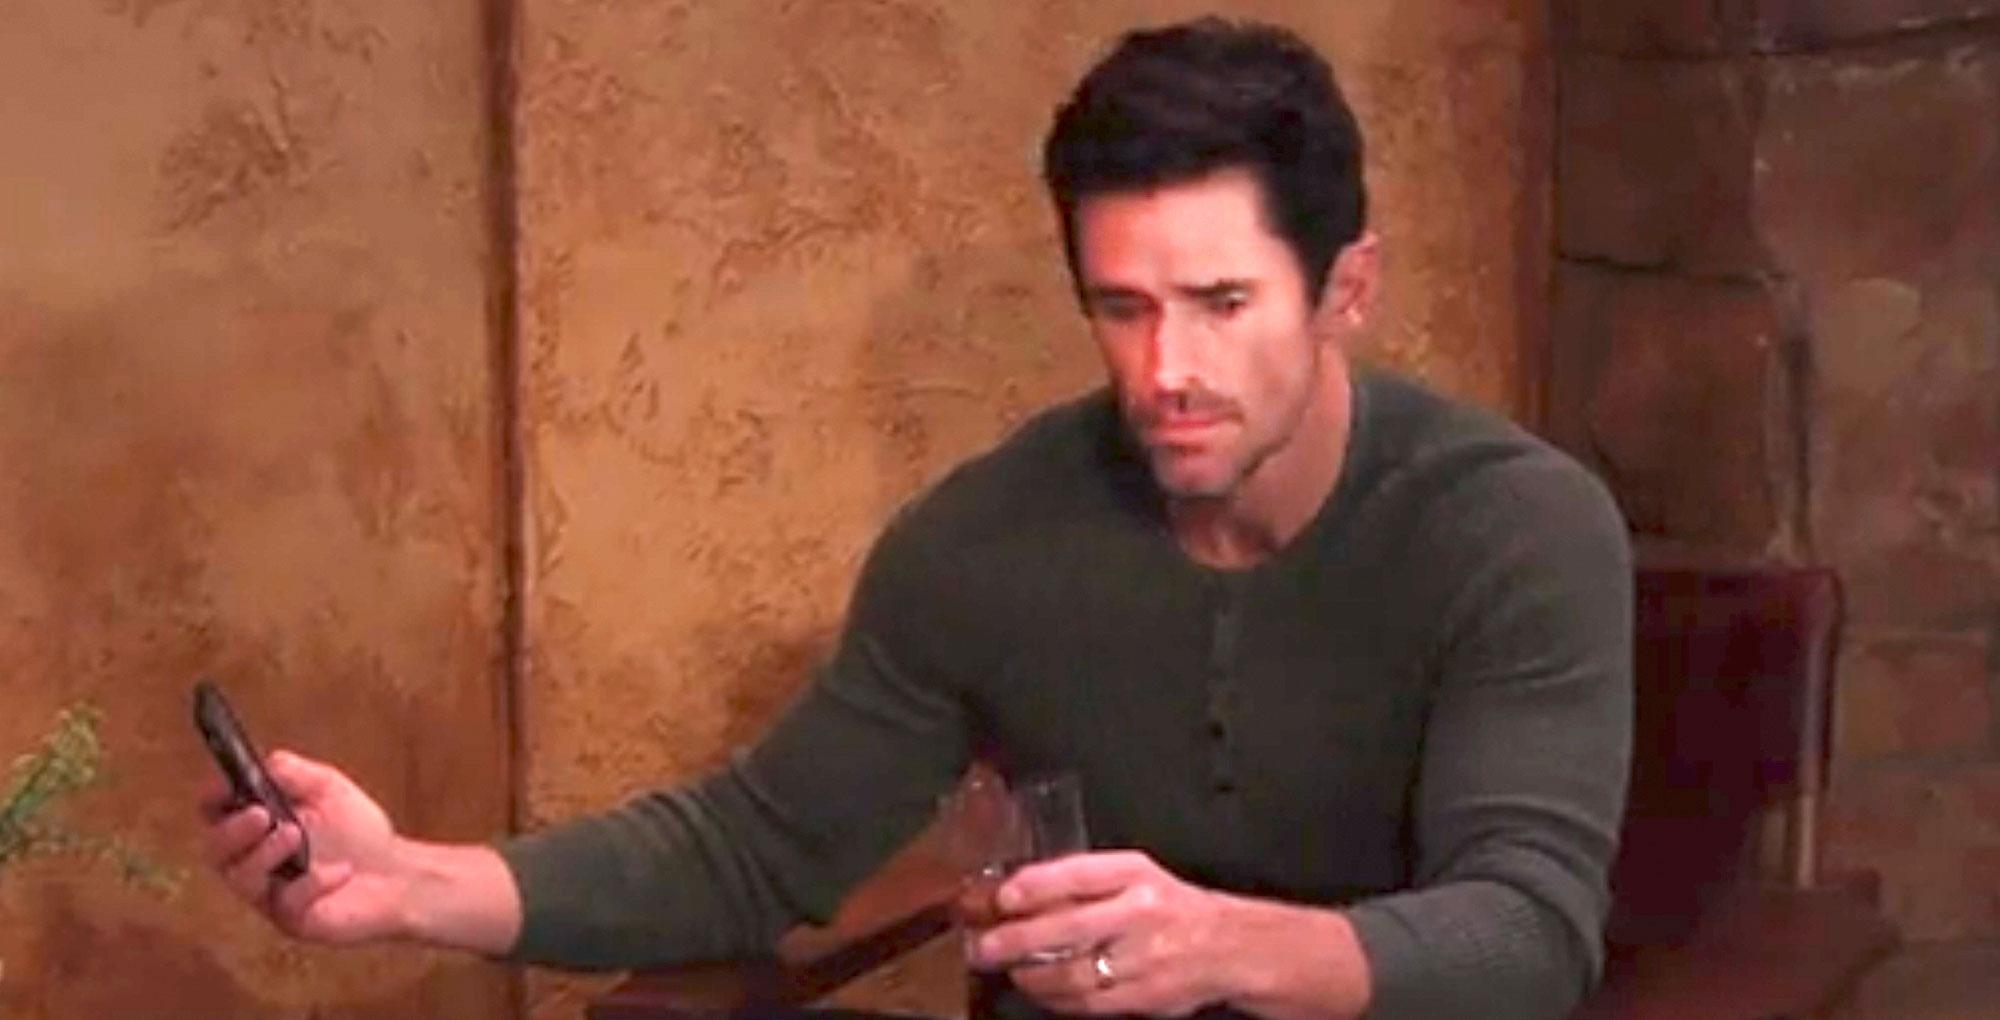 days of our lives recap for monday, may 15, 2023, shawn brady drunk and despondent.